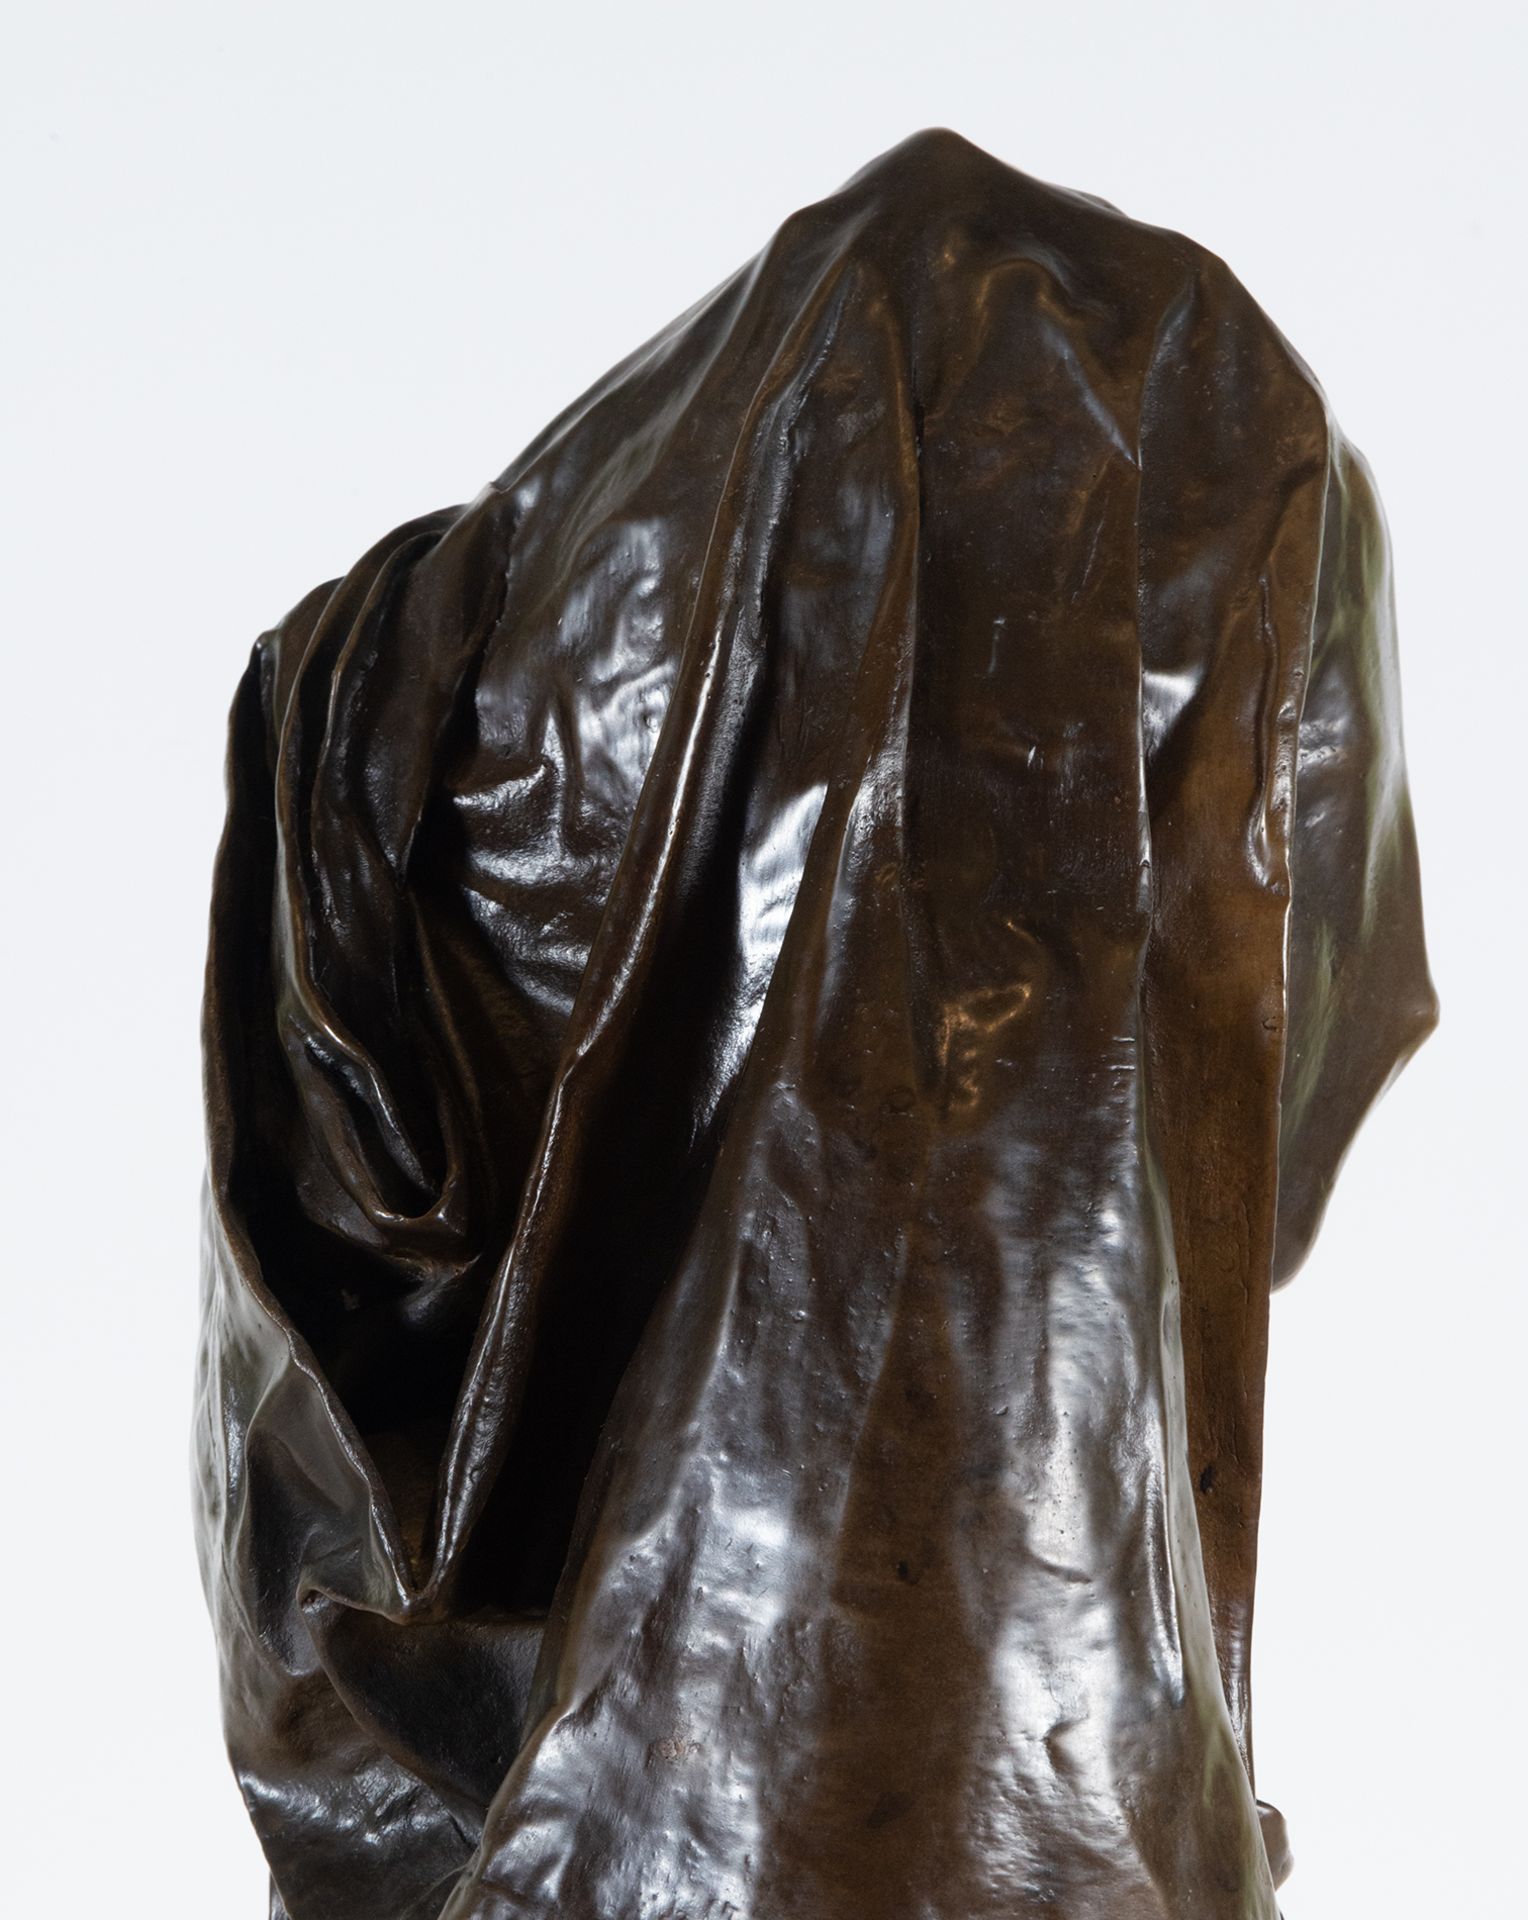 Bust of Lady with Veil, bronze sculpture, 19th century European school - Image 7 of 8